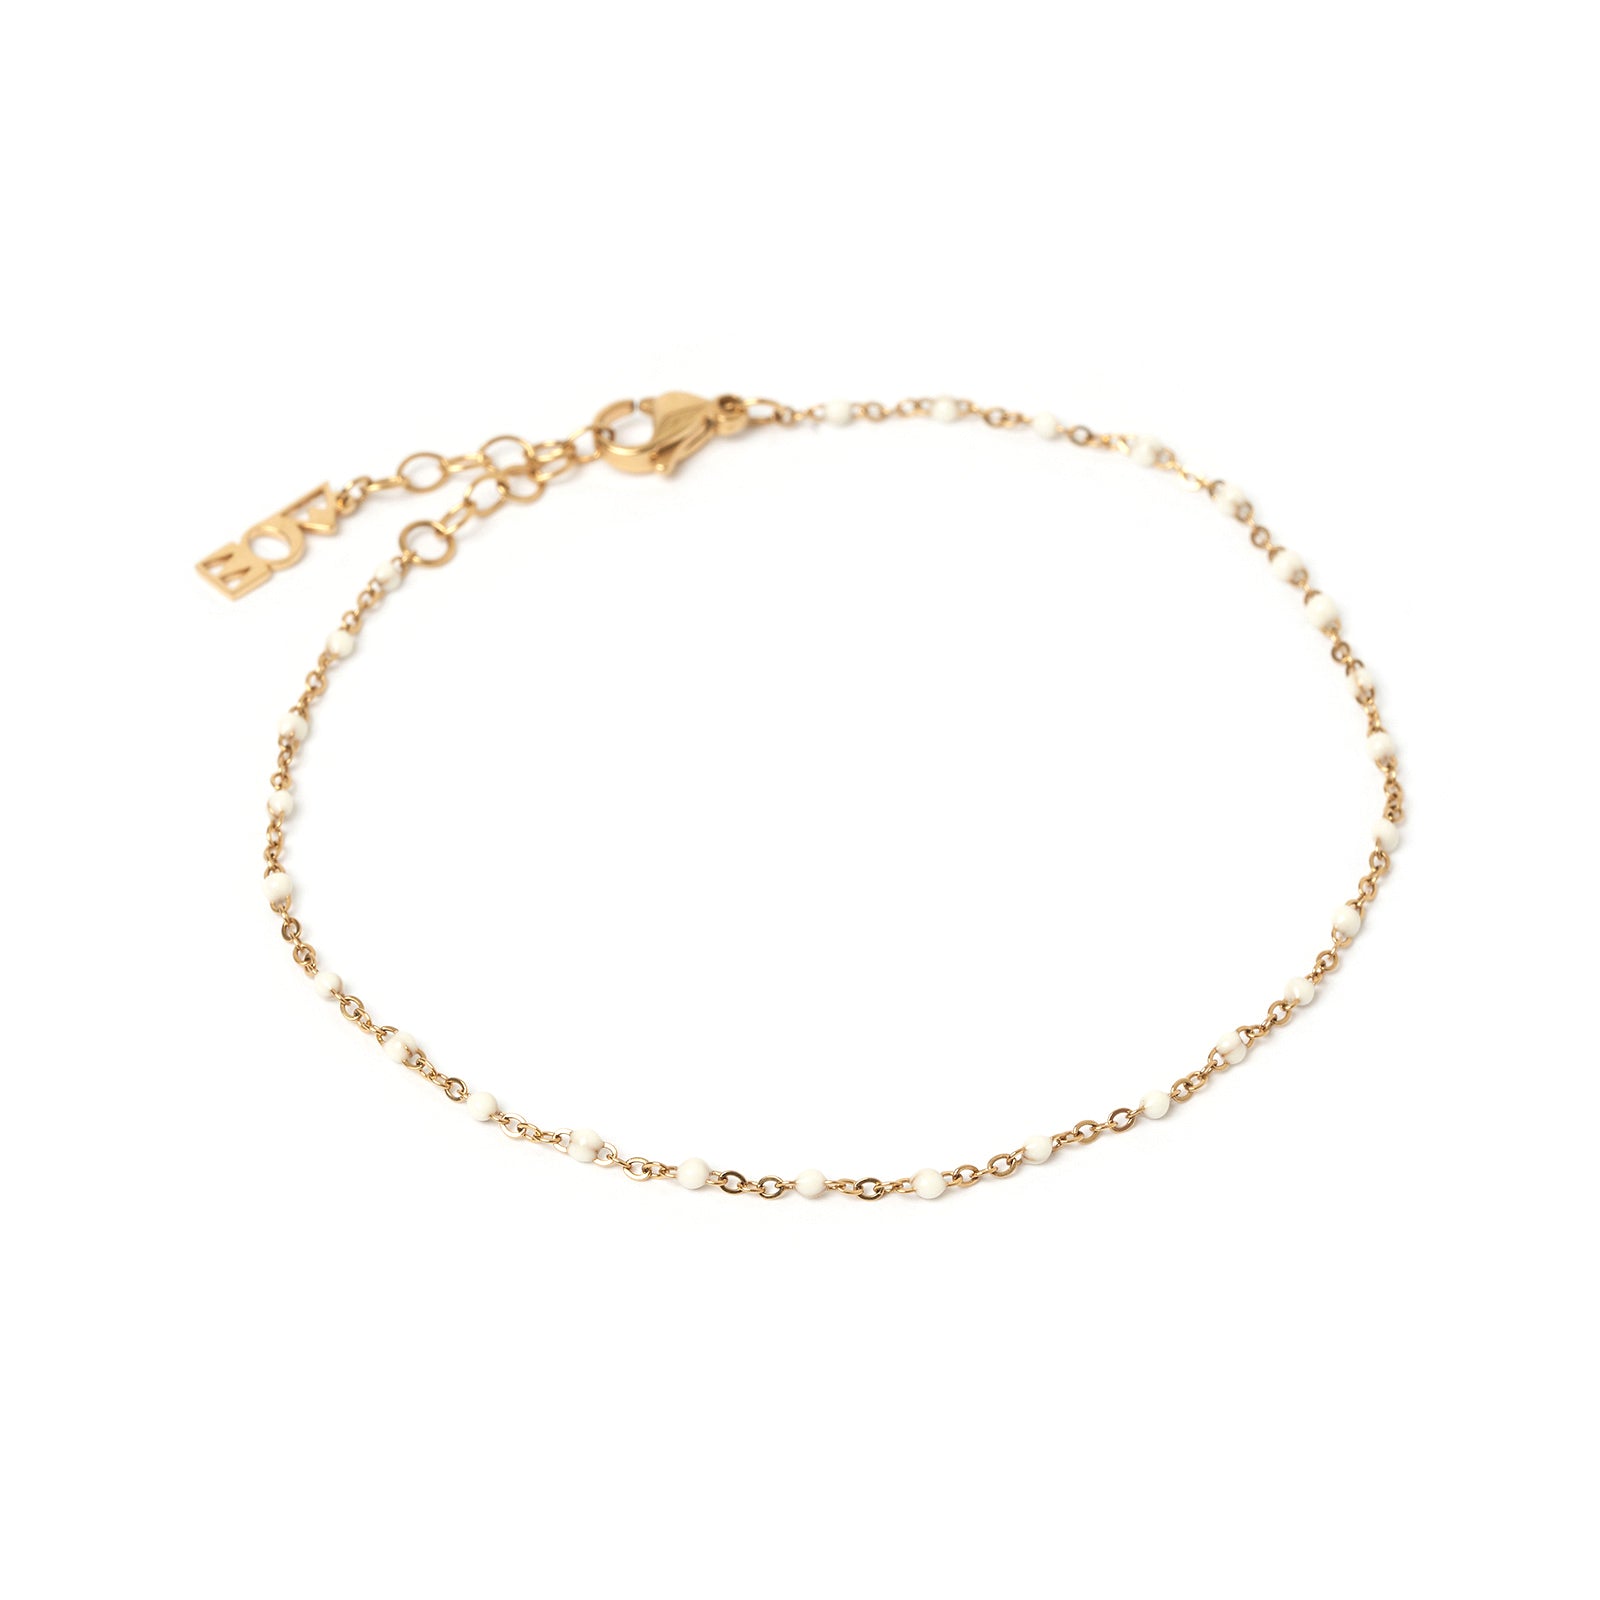 Peggy Gold and Enamel Anklet - Vanilla